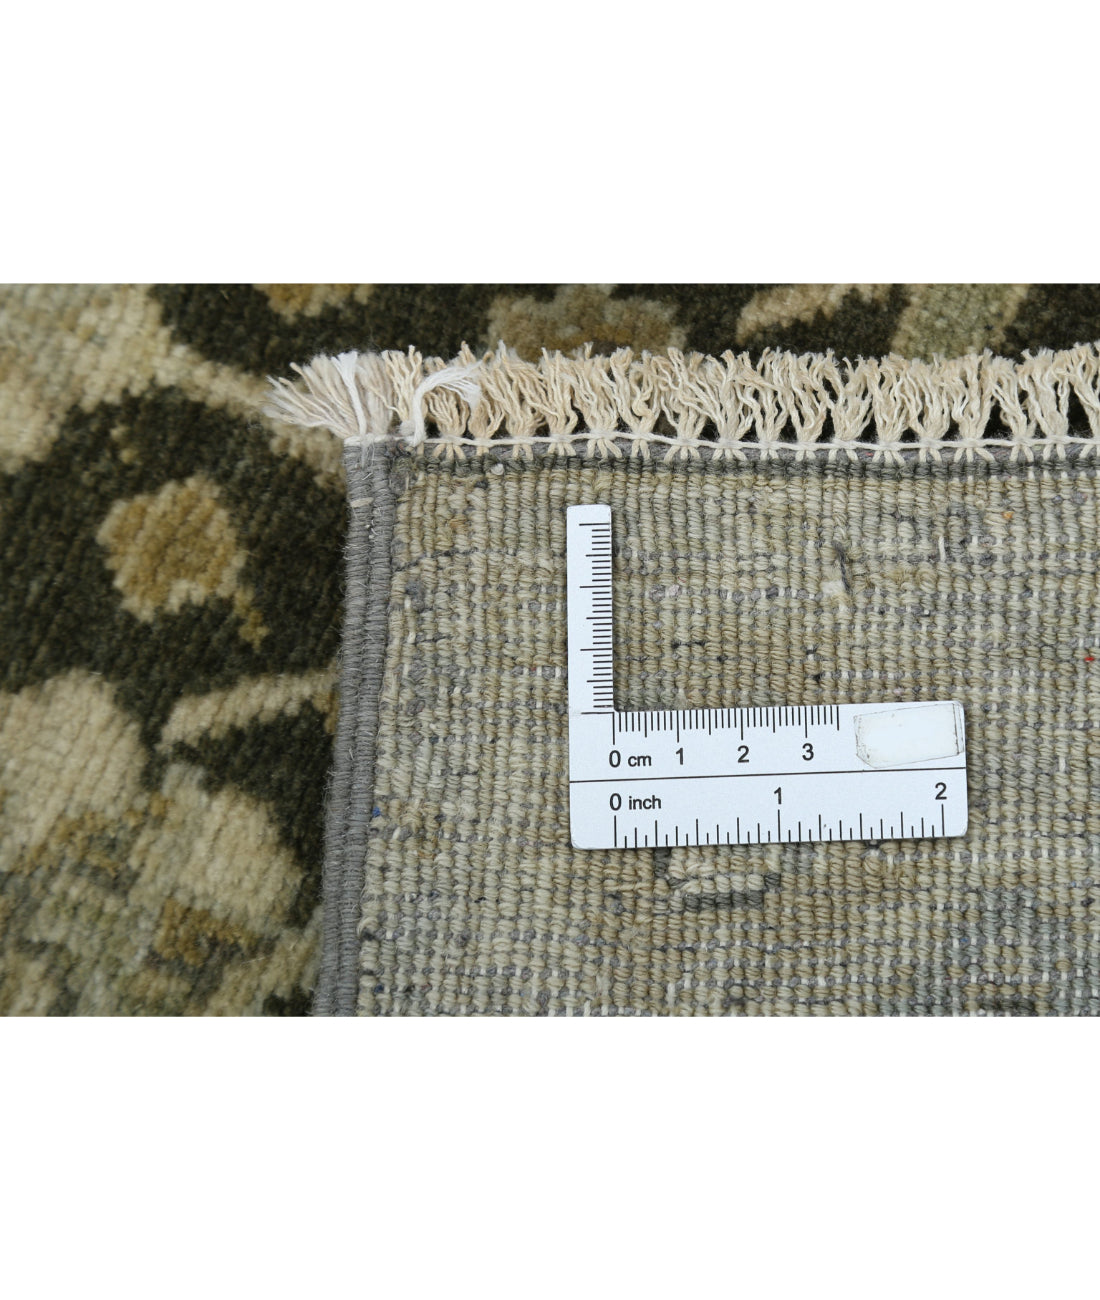 Ziegler 2'7'' X 7'4'' Hand-Knotted Wool Rug 2'7'' x 7'4'' (78 X 220) / Green / N/A